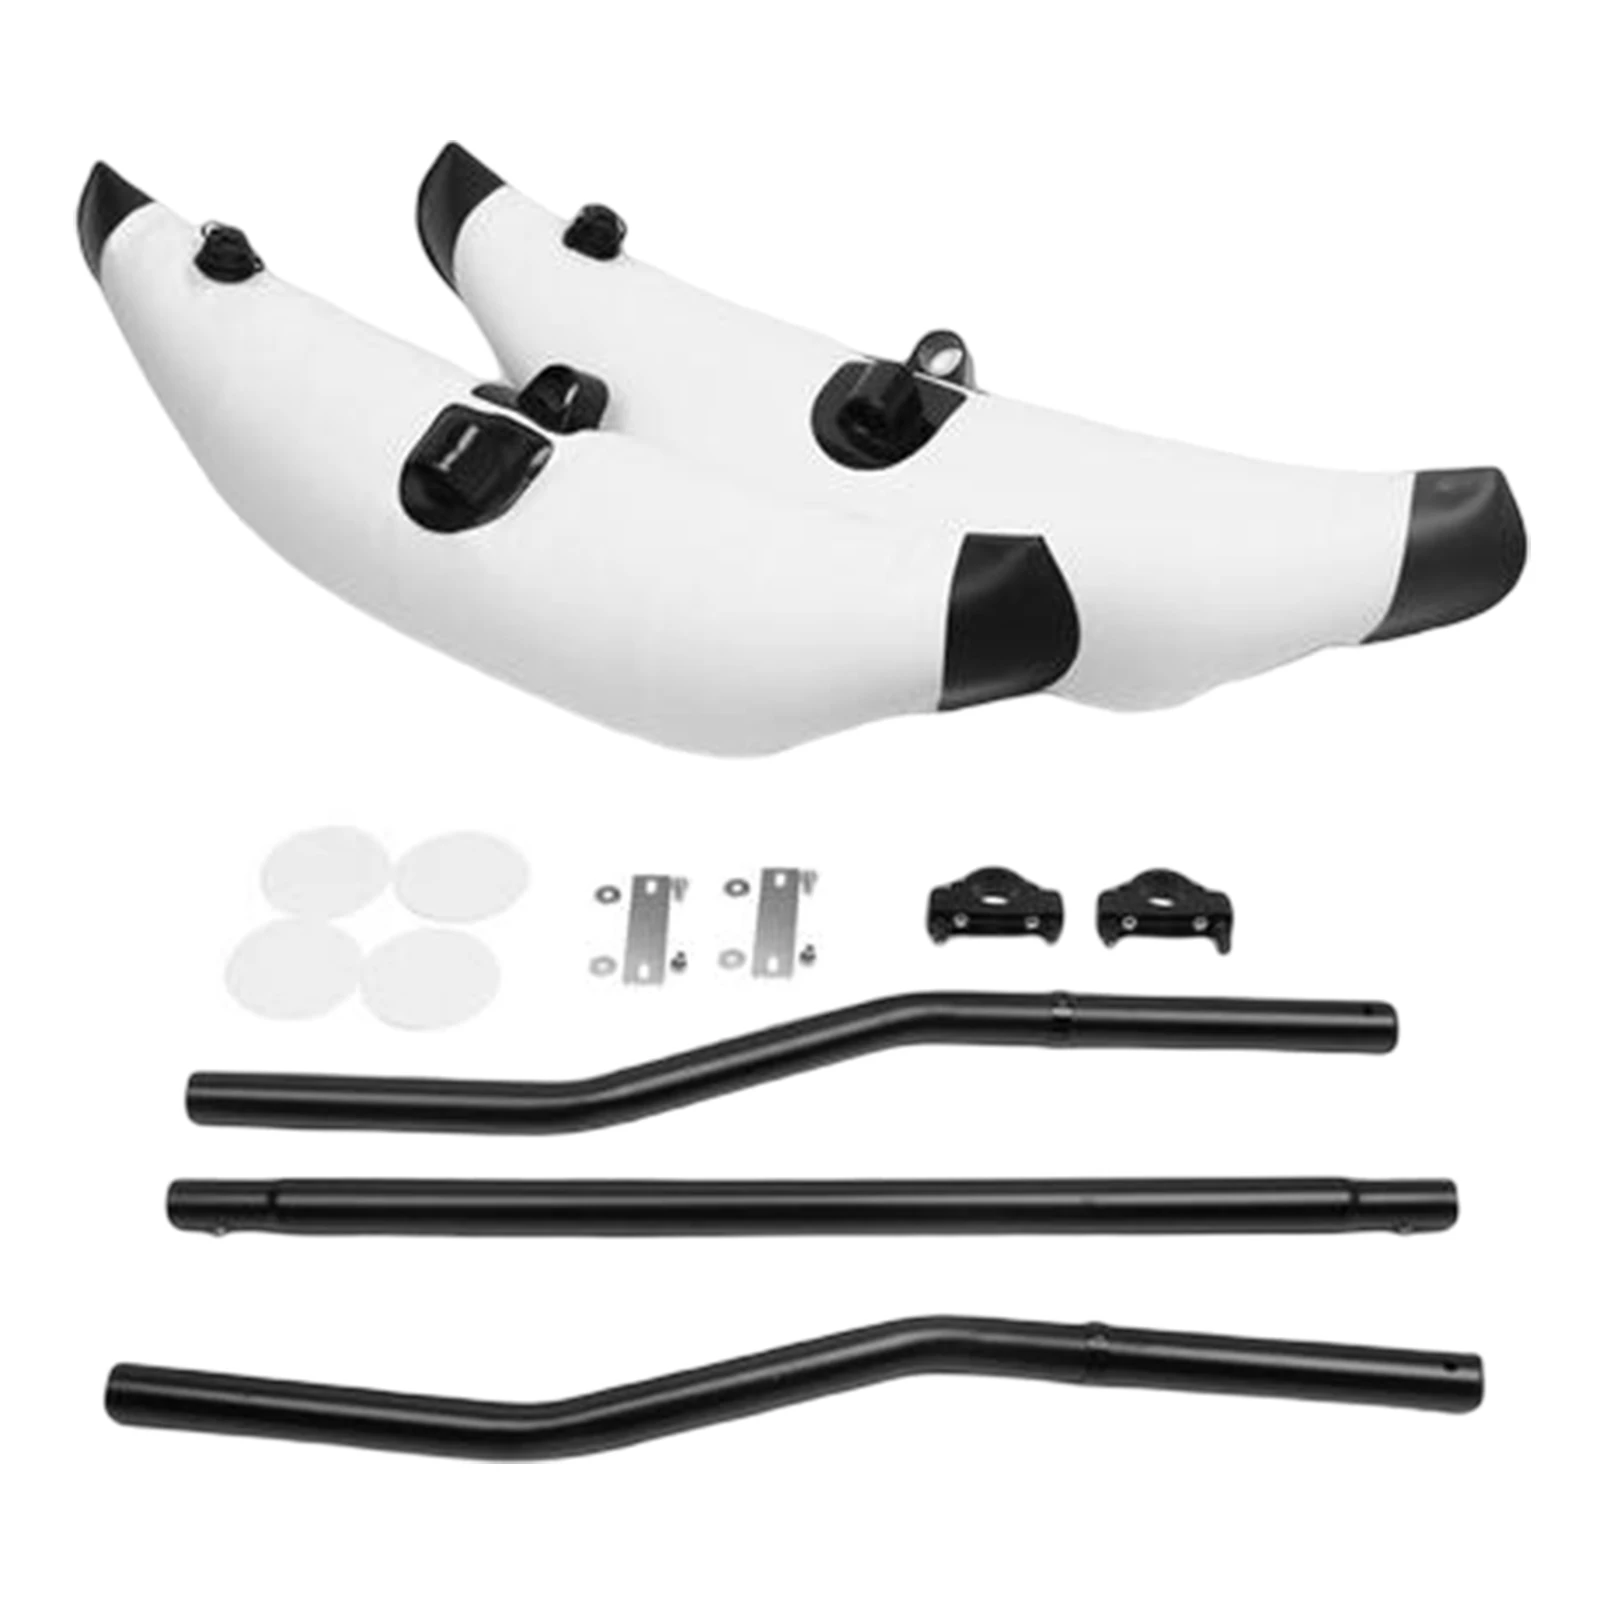 Kayak Float Kayak PVC Inflatable Outrigger Float with Sidekick Arms Rod Kayak Boat Fishing Standing Float Stabilizer System Kit